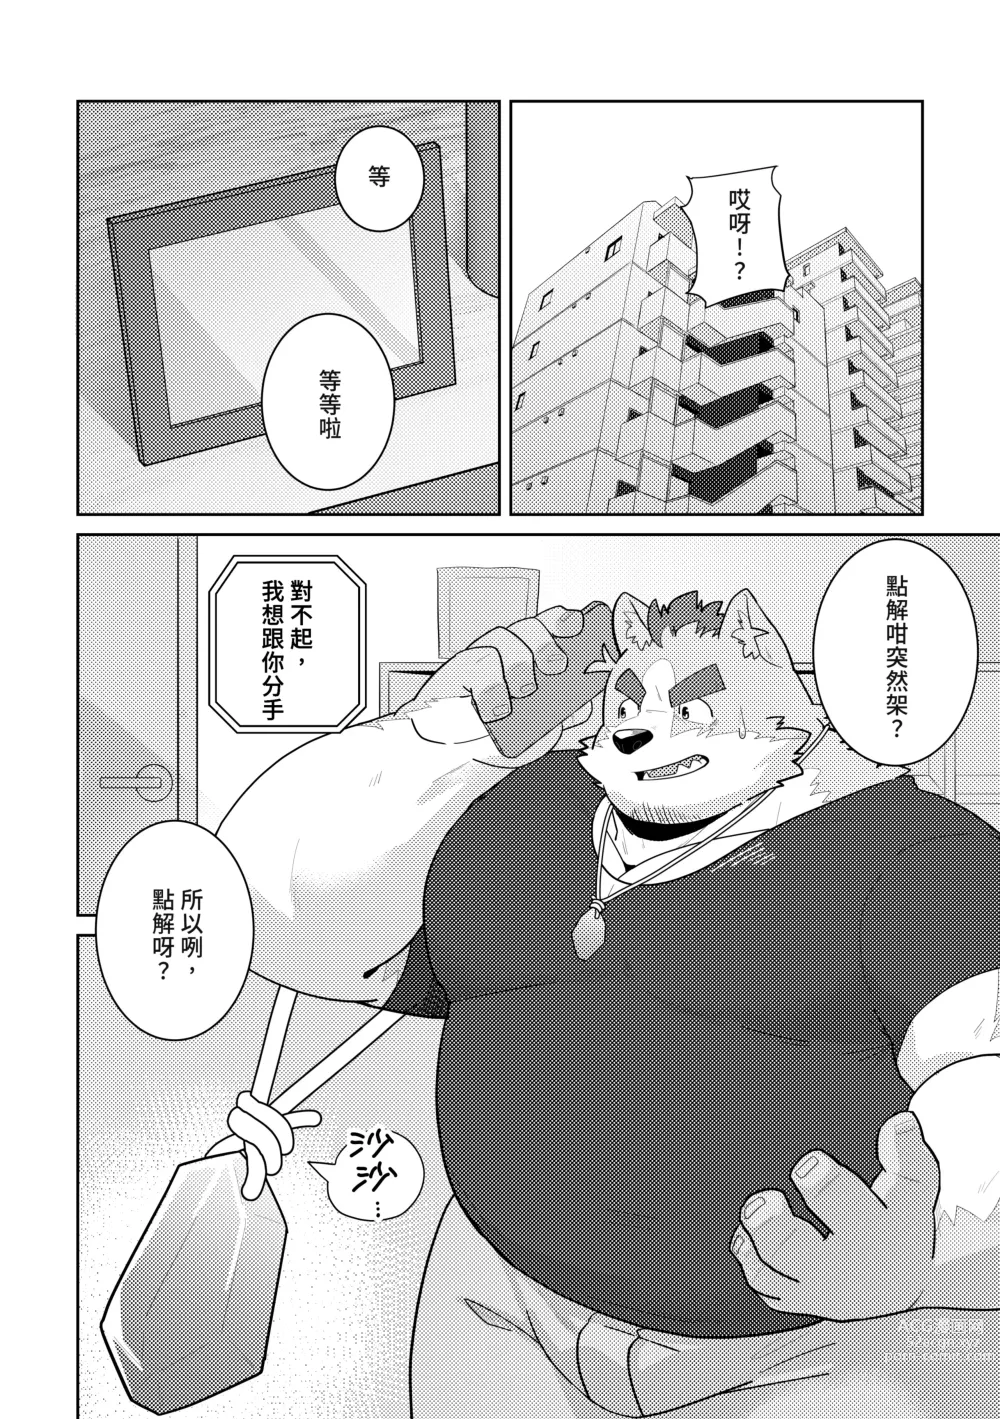 Page 4 of doujinshi 幽靈戀人